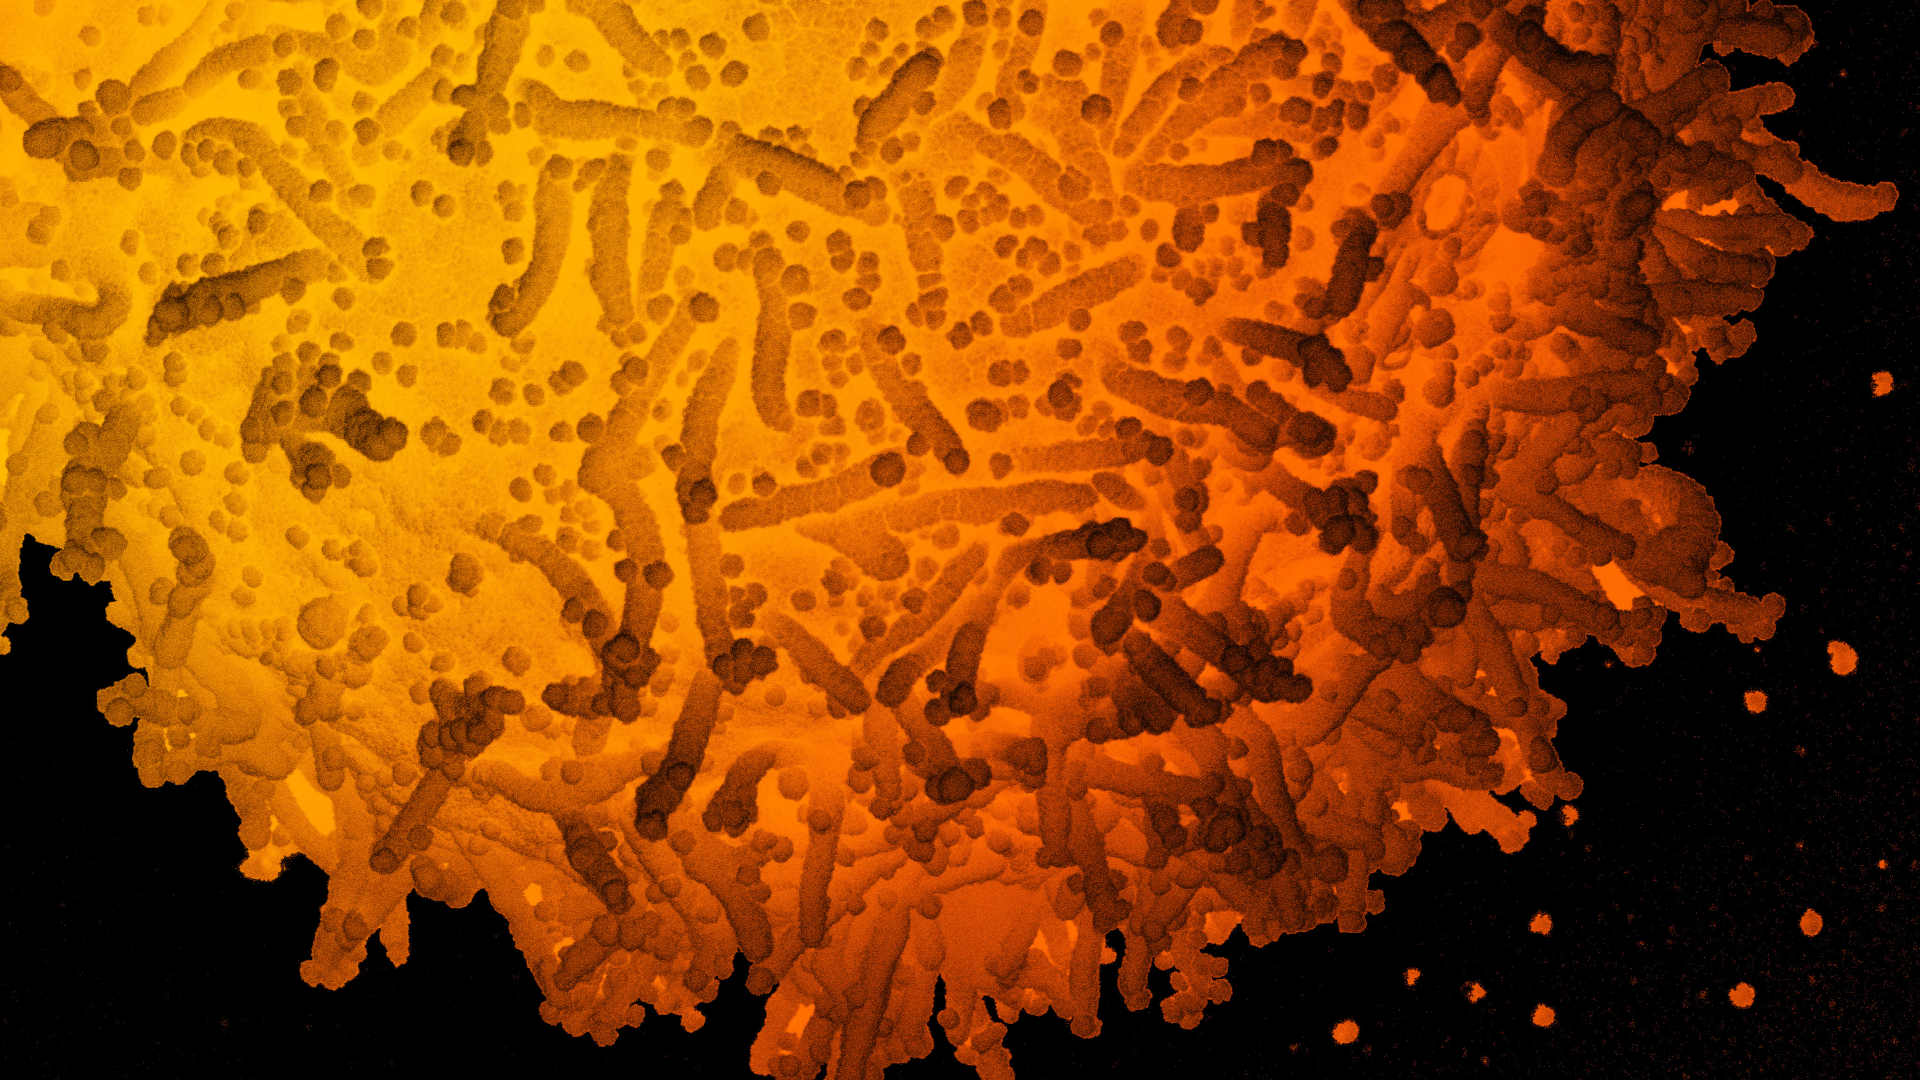 Color-enhanced scanning electron microscope image of a human cell infected with SARS-CoV-2 particles, isolated from a patient sample. Virus particles are the small, spherical structures found on the surface of the cell.